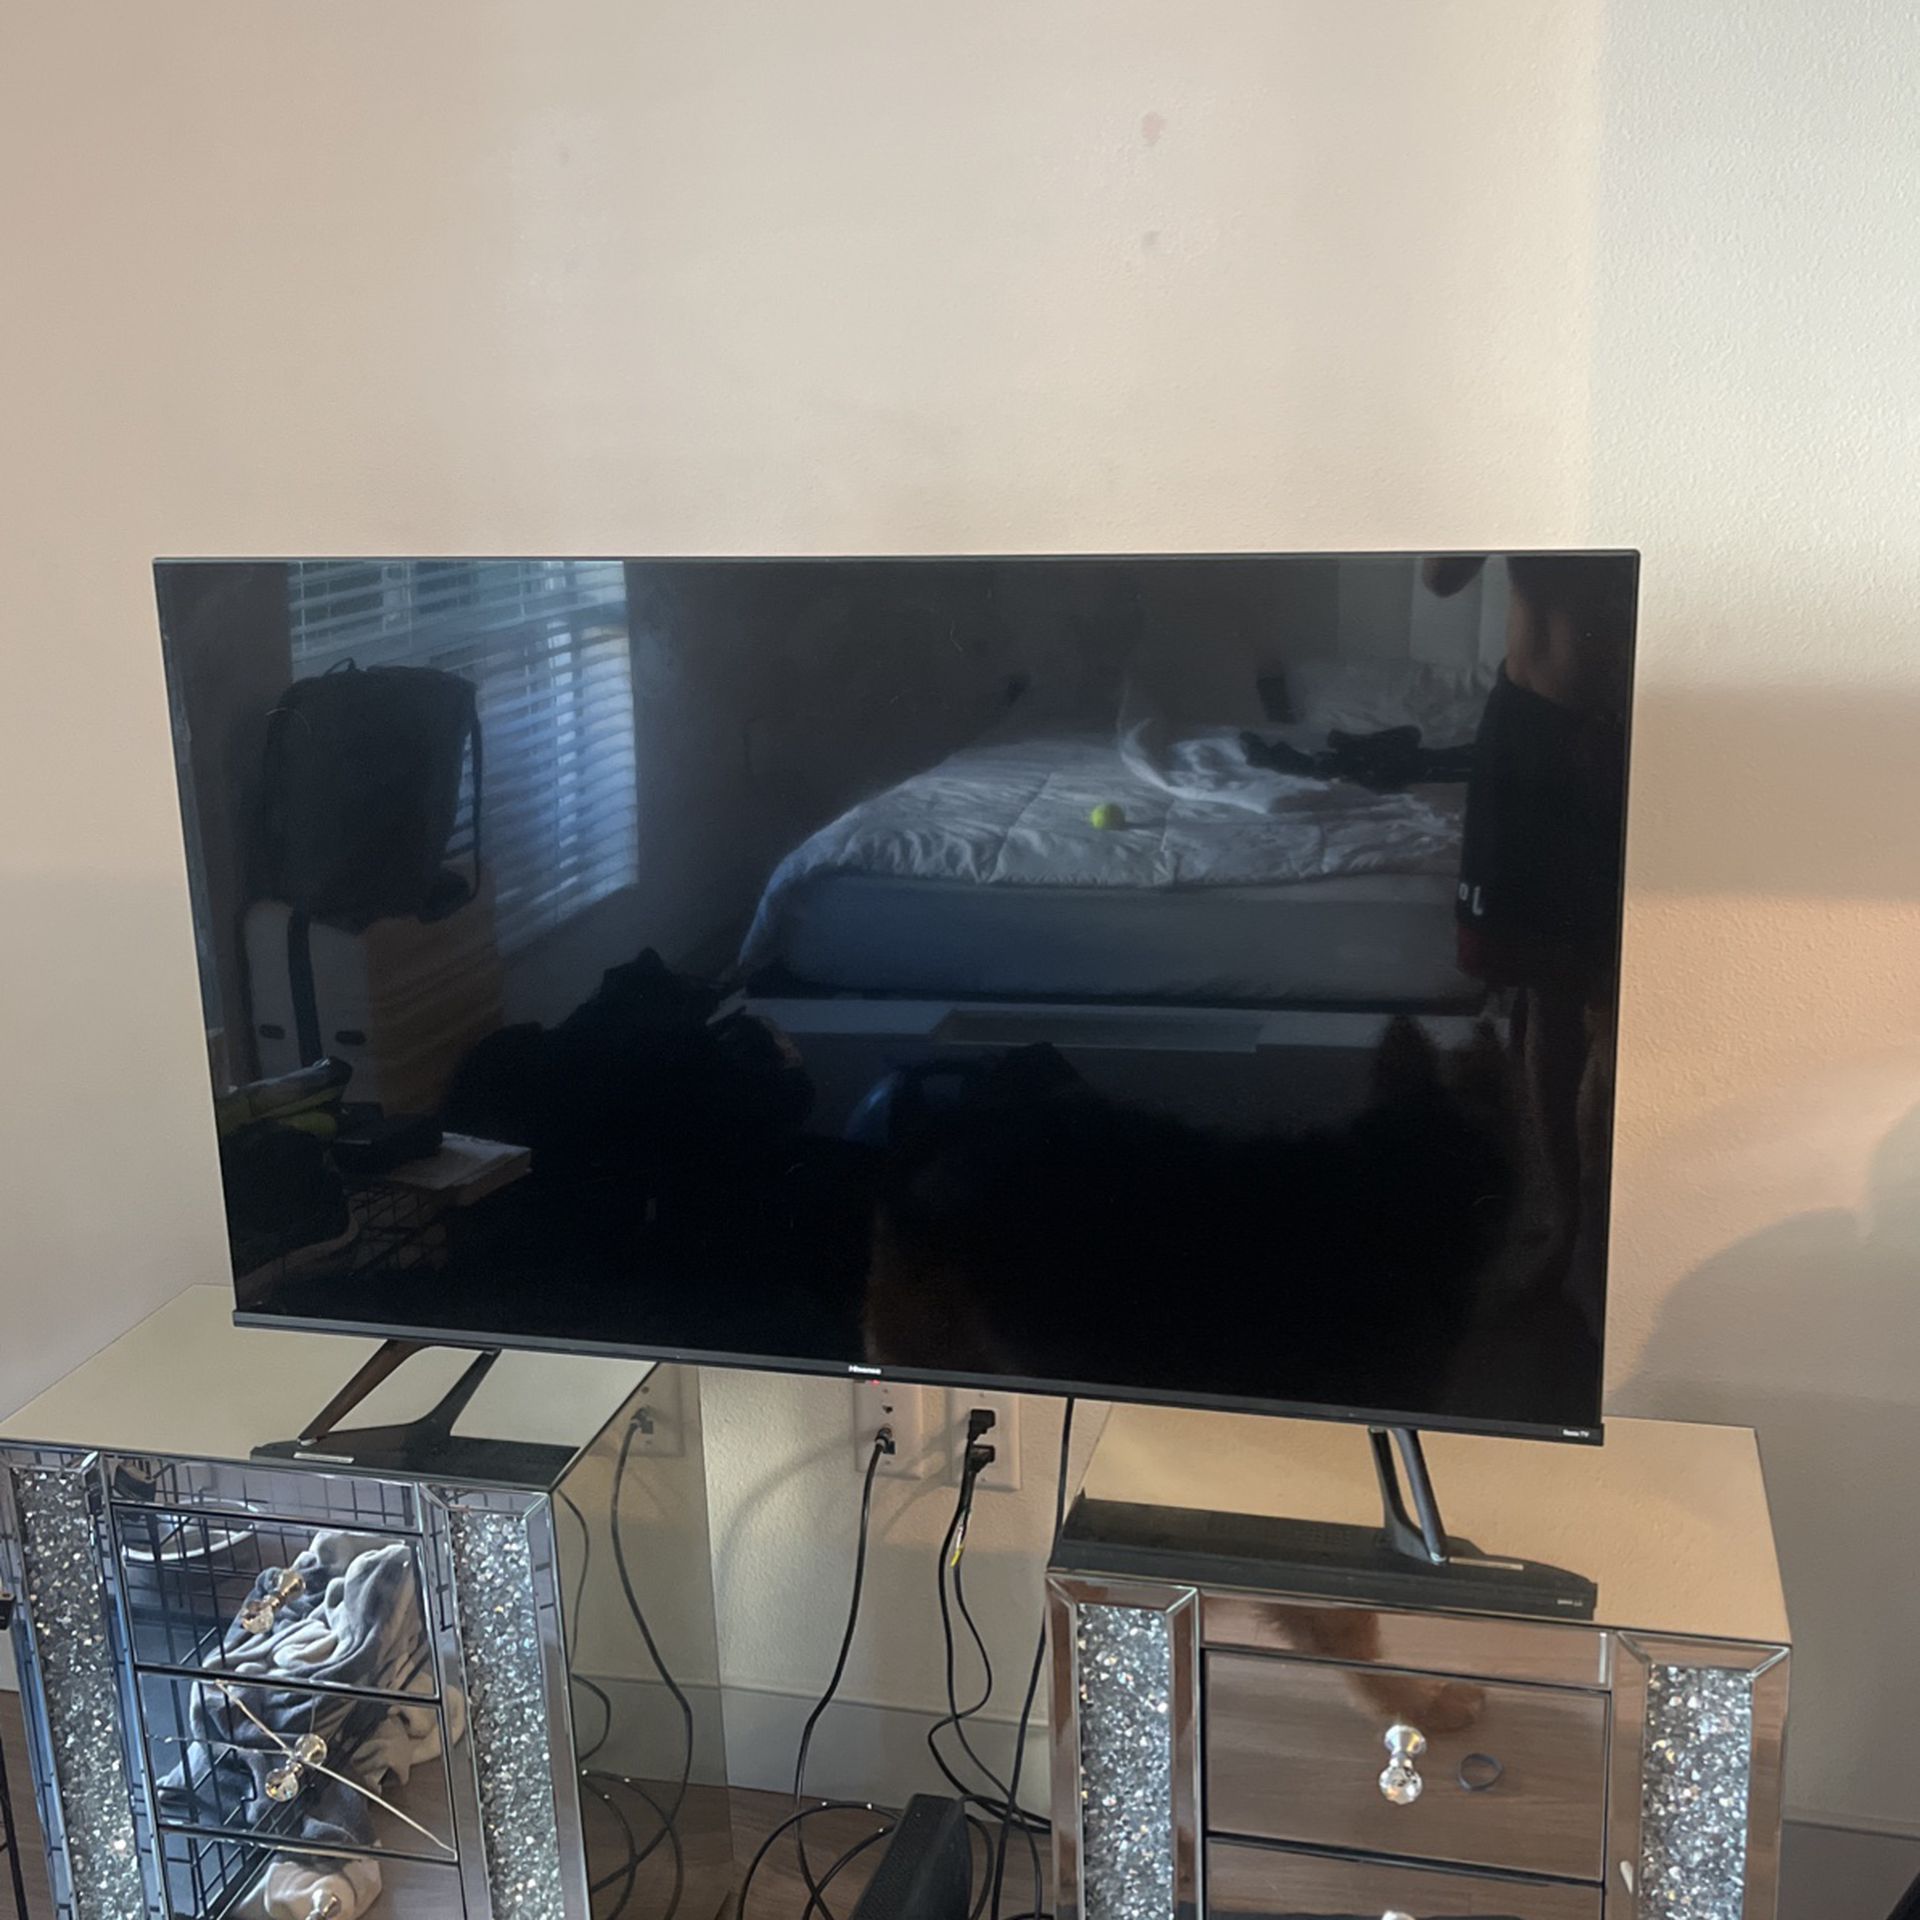 Hisense Roku Tv 240$    56 Inches   Mirror Nightstands Also For Sale 170$ For Both 